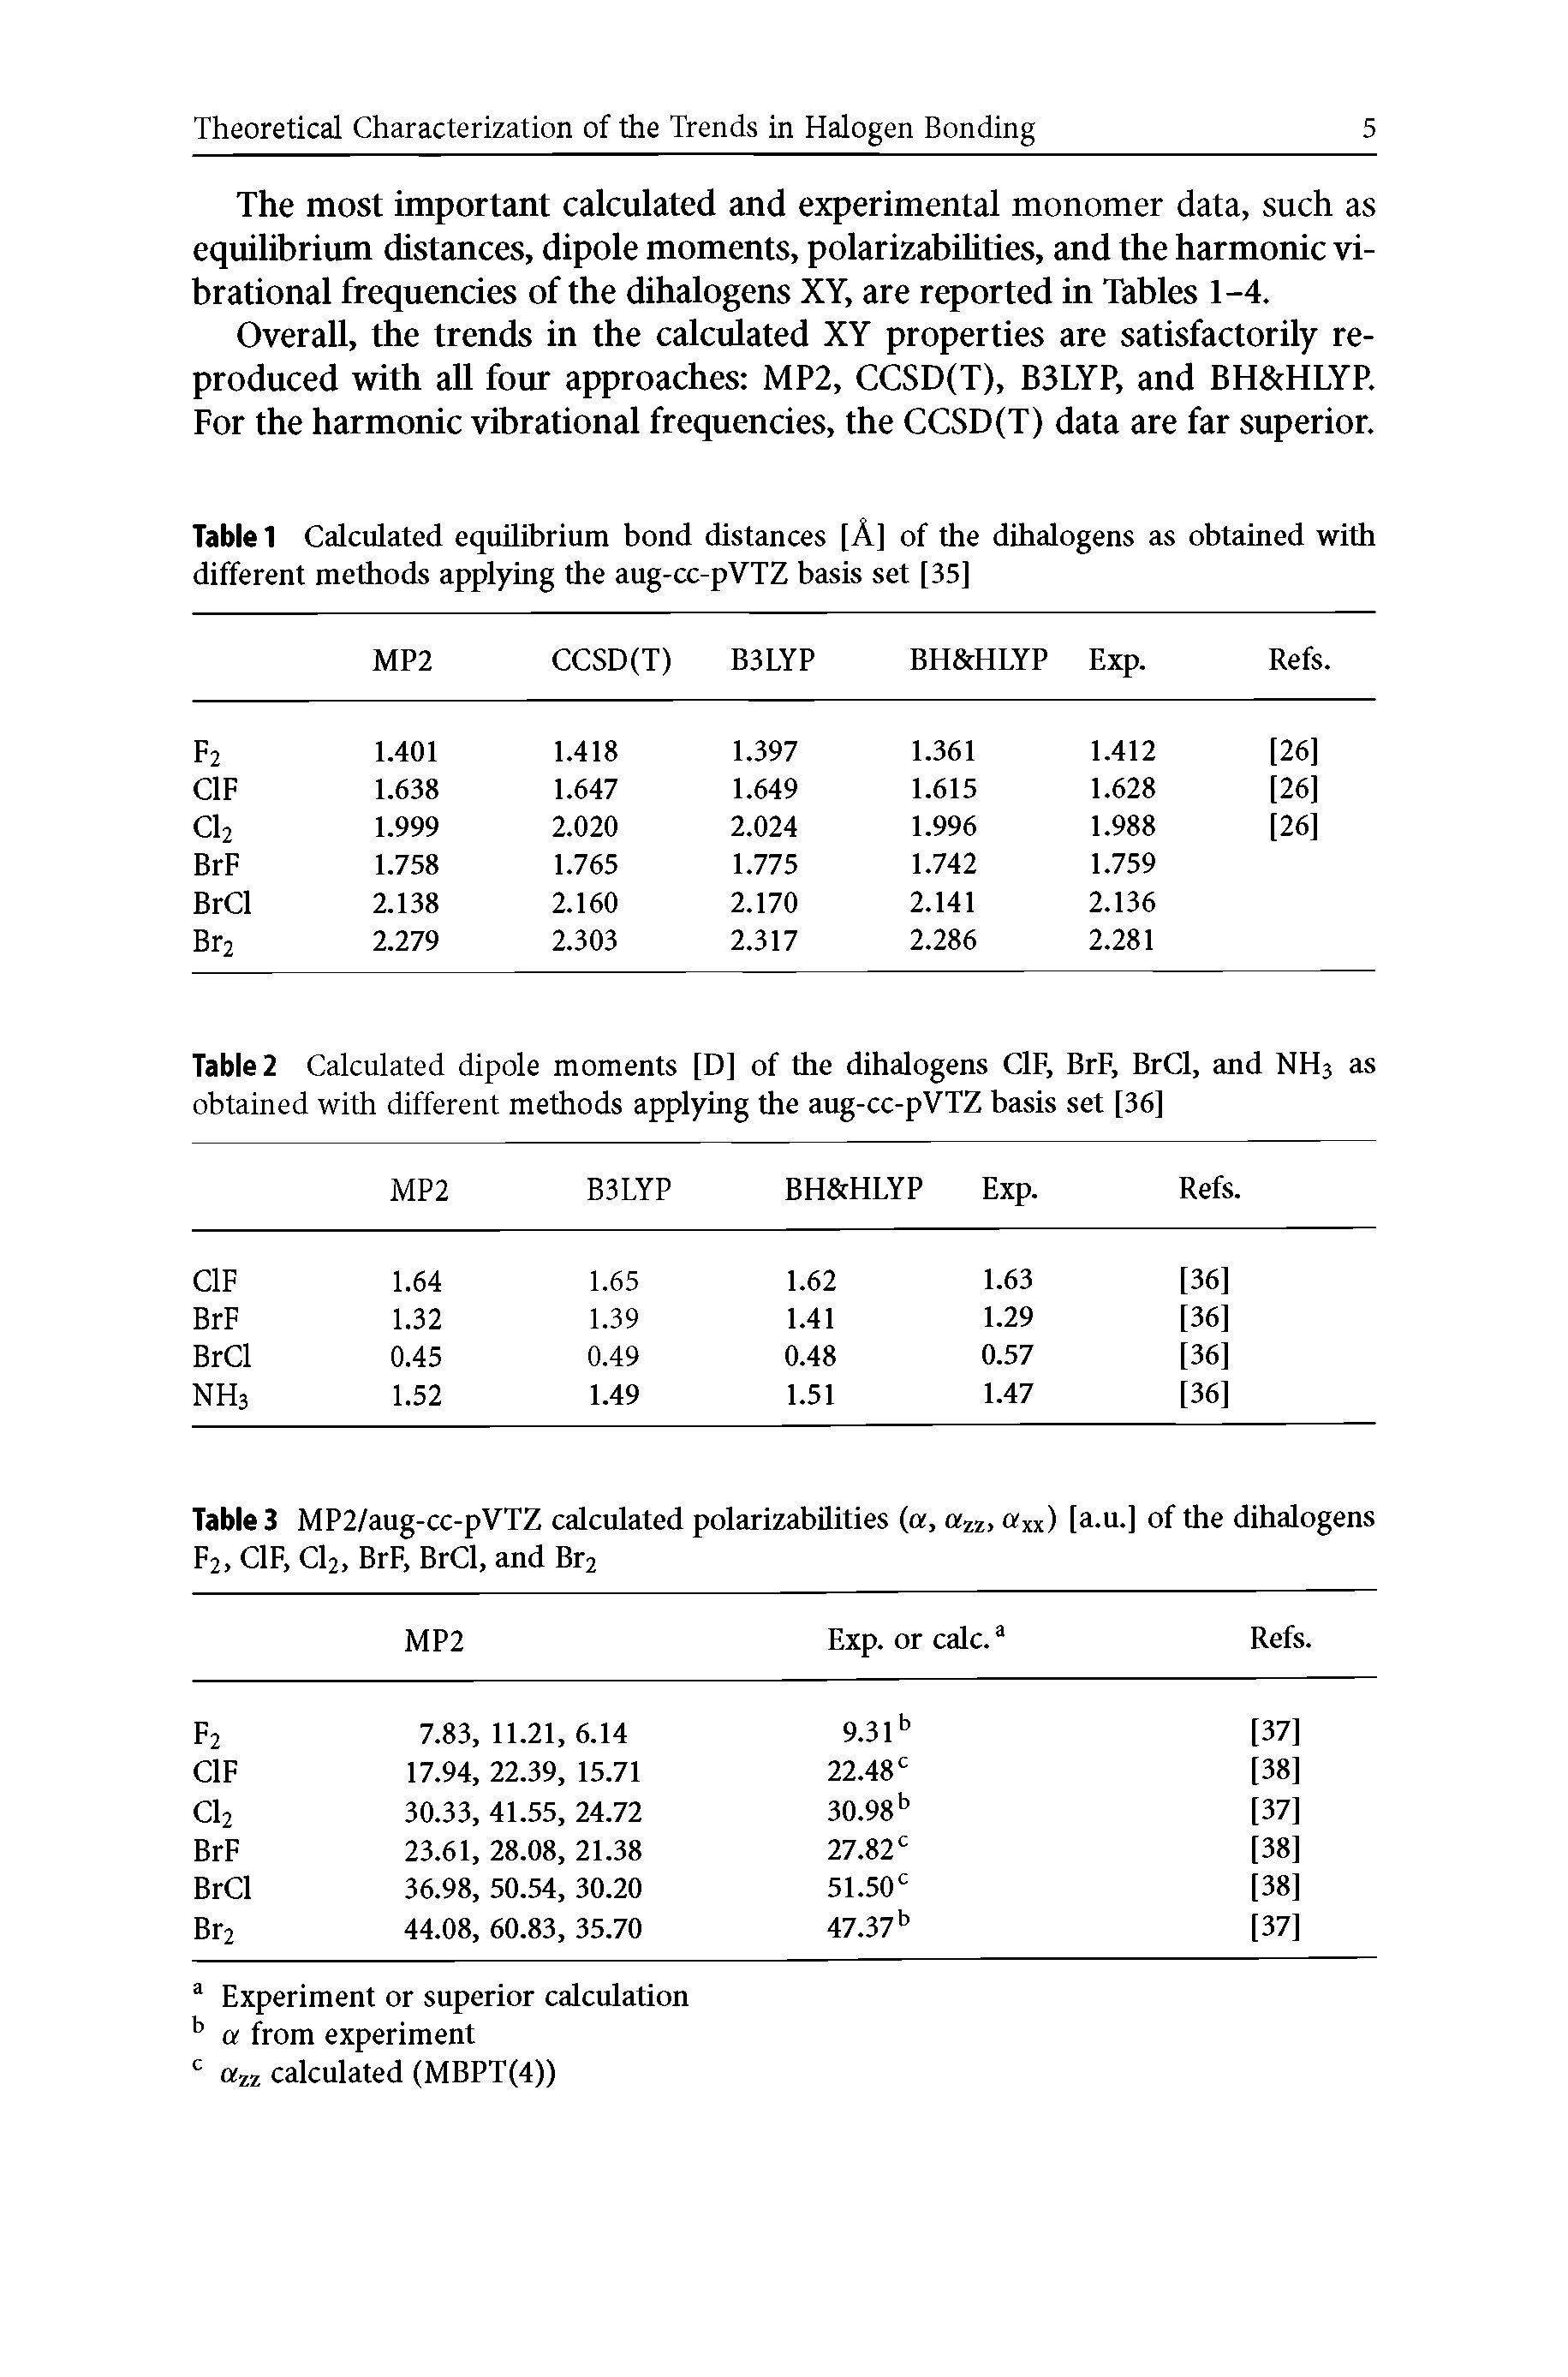 Table 2 Calculated dipole moments [D] of the dihalogens C1F, BrF, BrCl, and NH3 as obtained with different methods applying the aug-cc-pVTZ basis set [36] ...